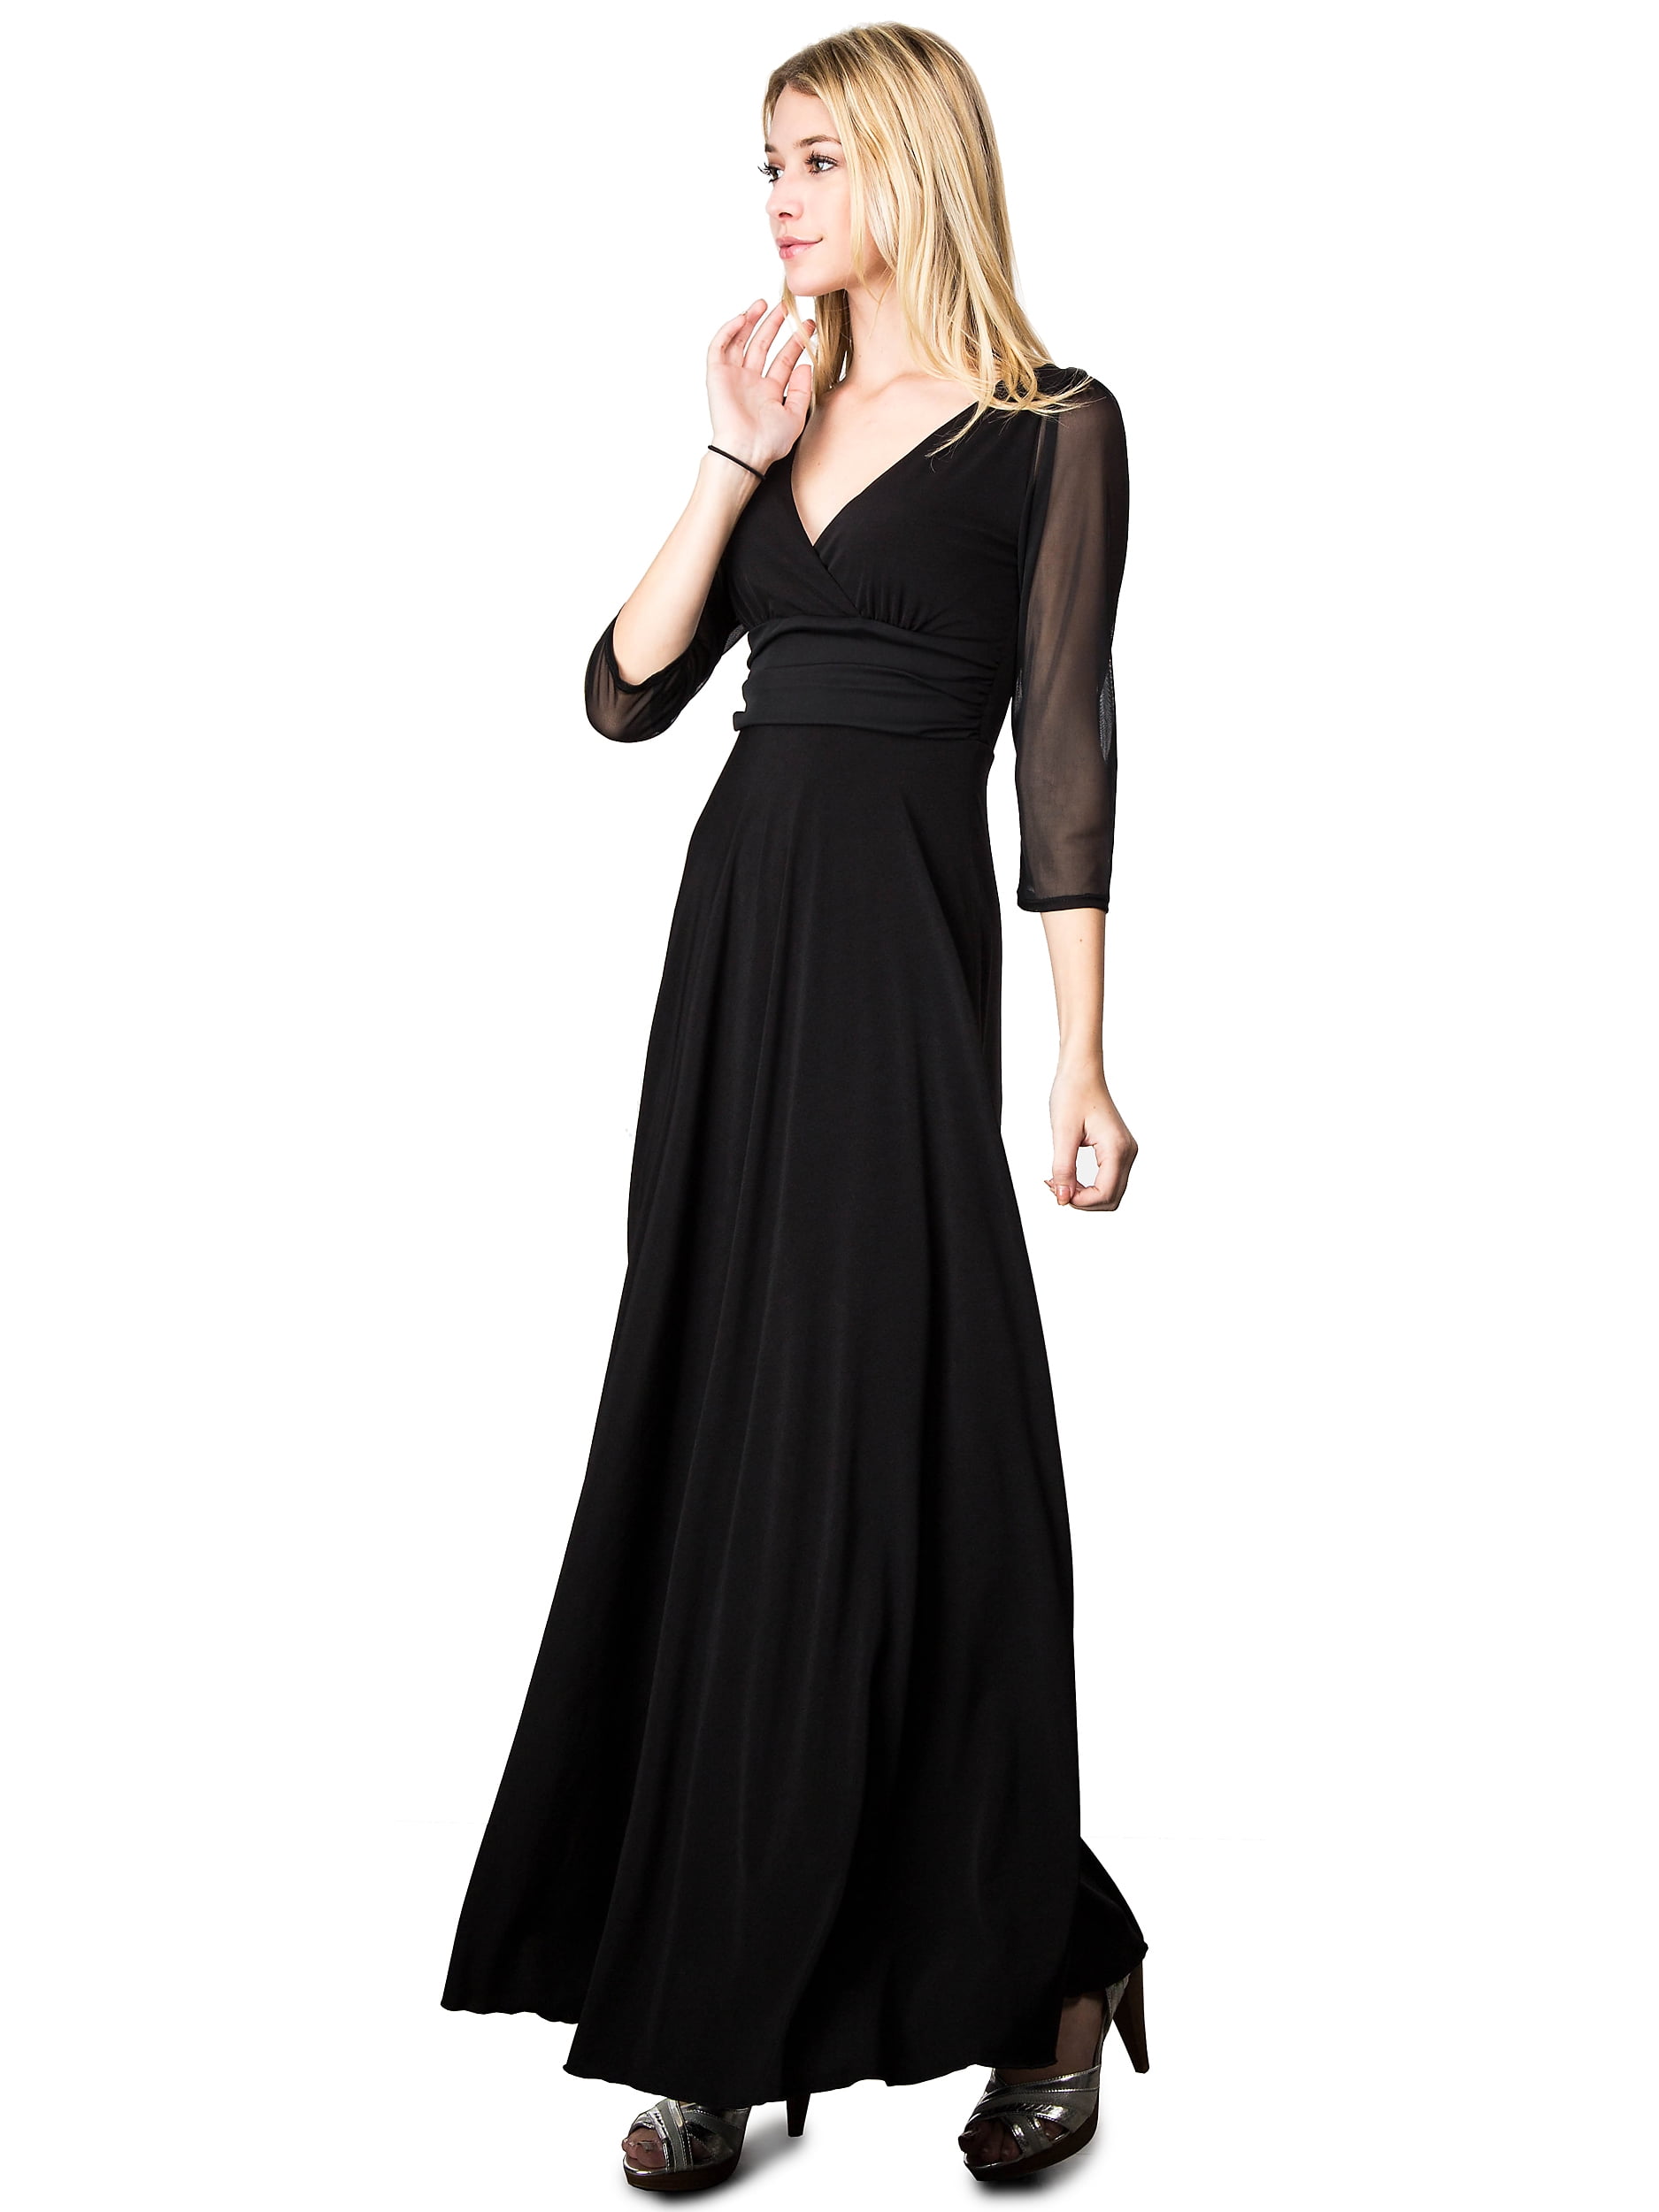 rack long dresses formal for women pictures images subscriptions – Long